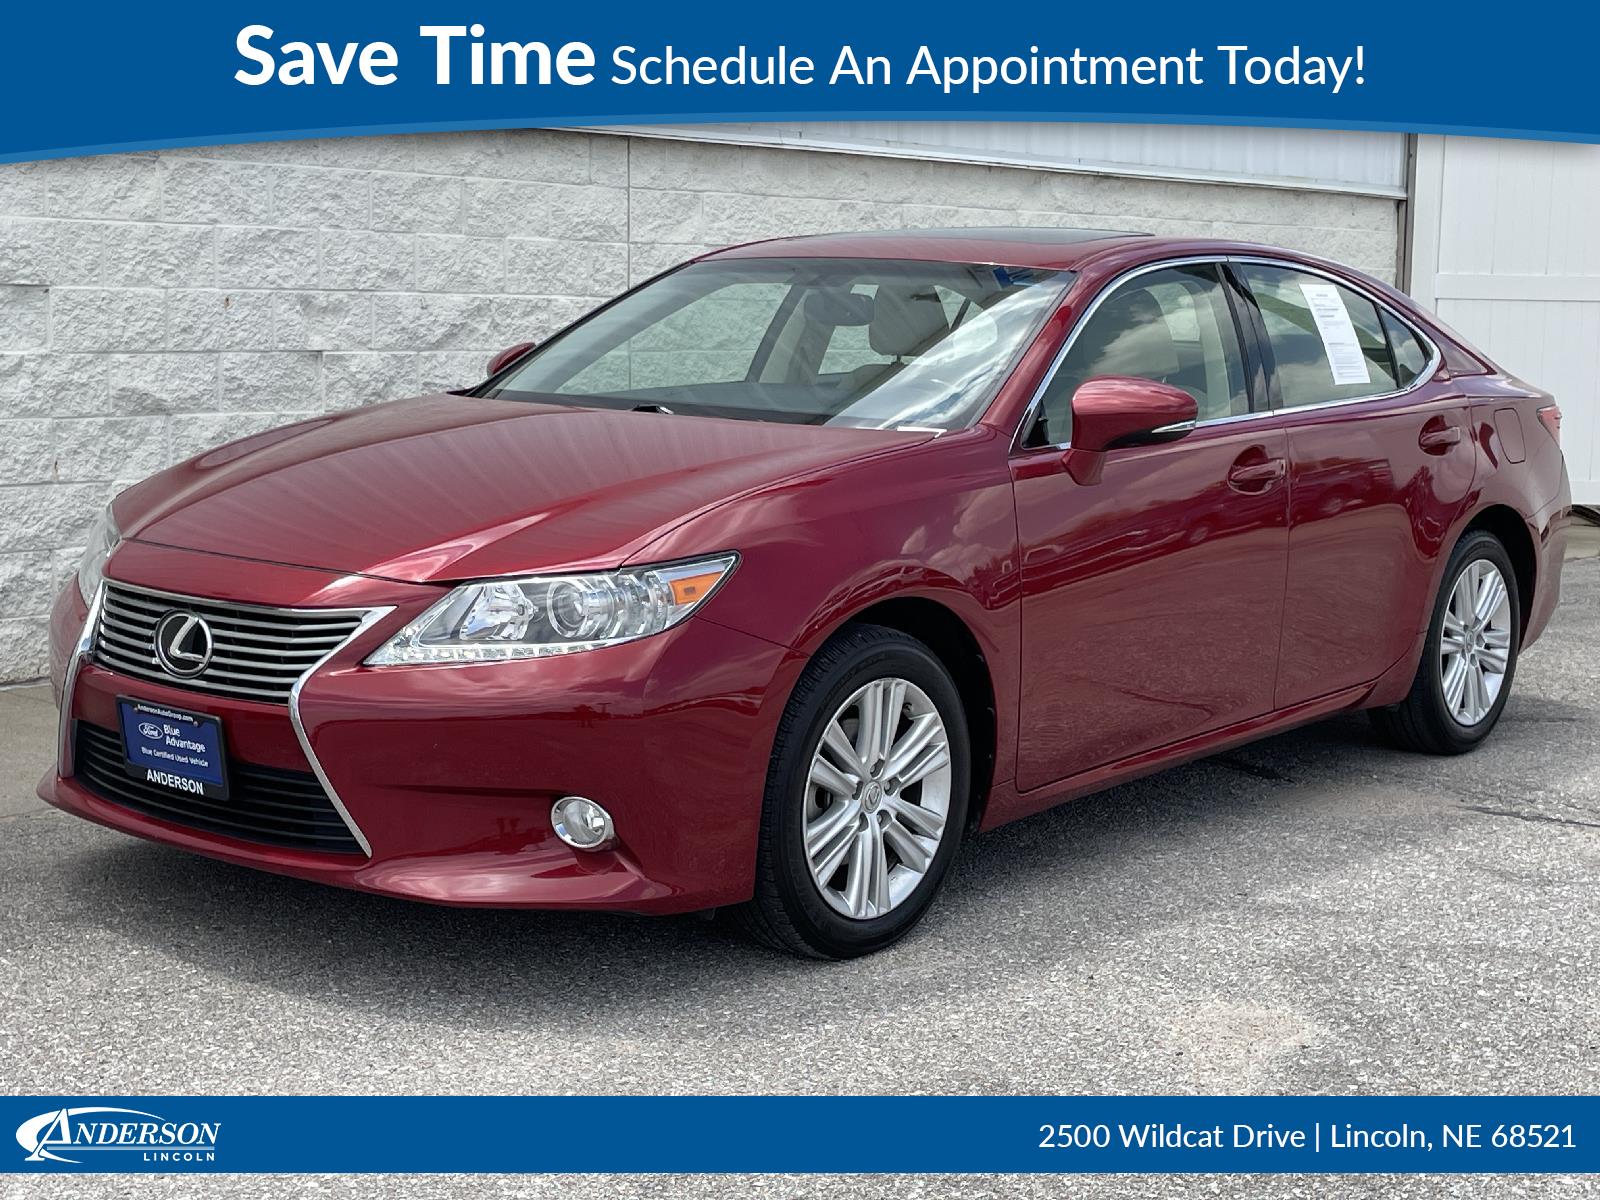 Used 2015 Lexus ES 350 Crafted Line Stock: 1004306A